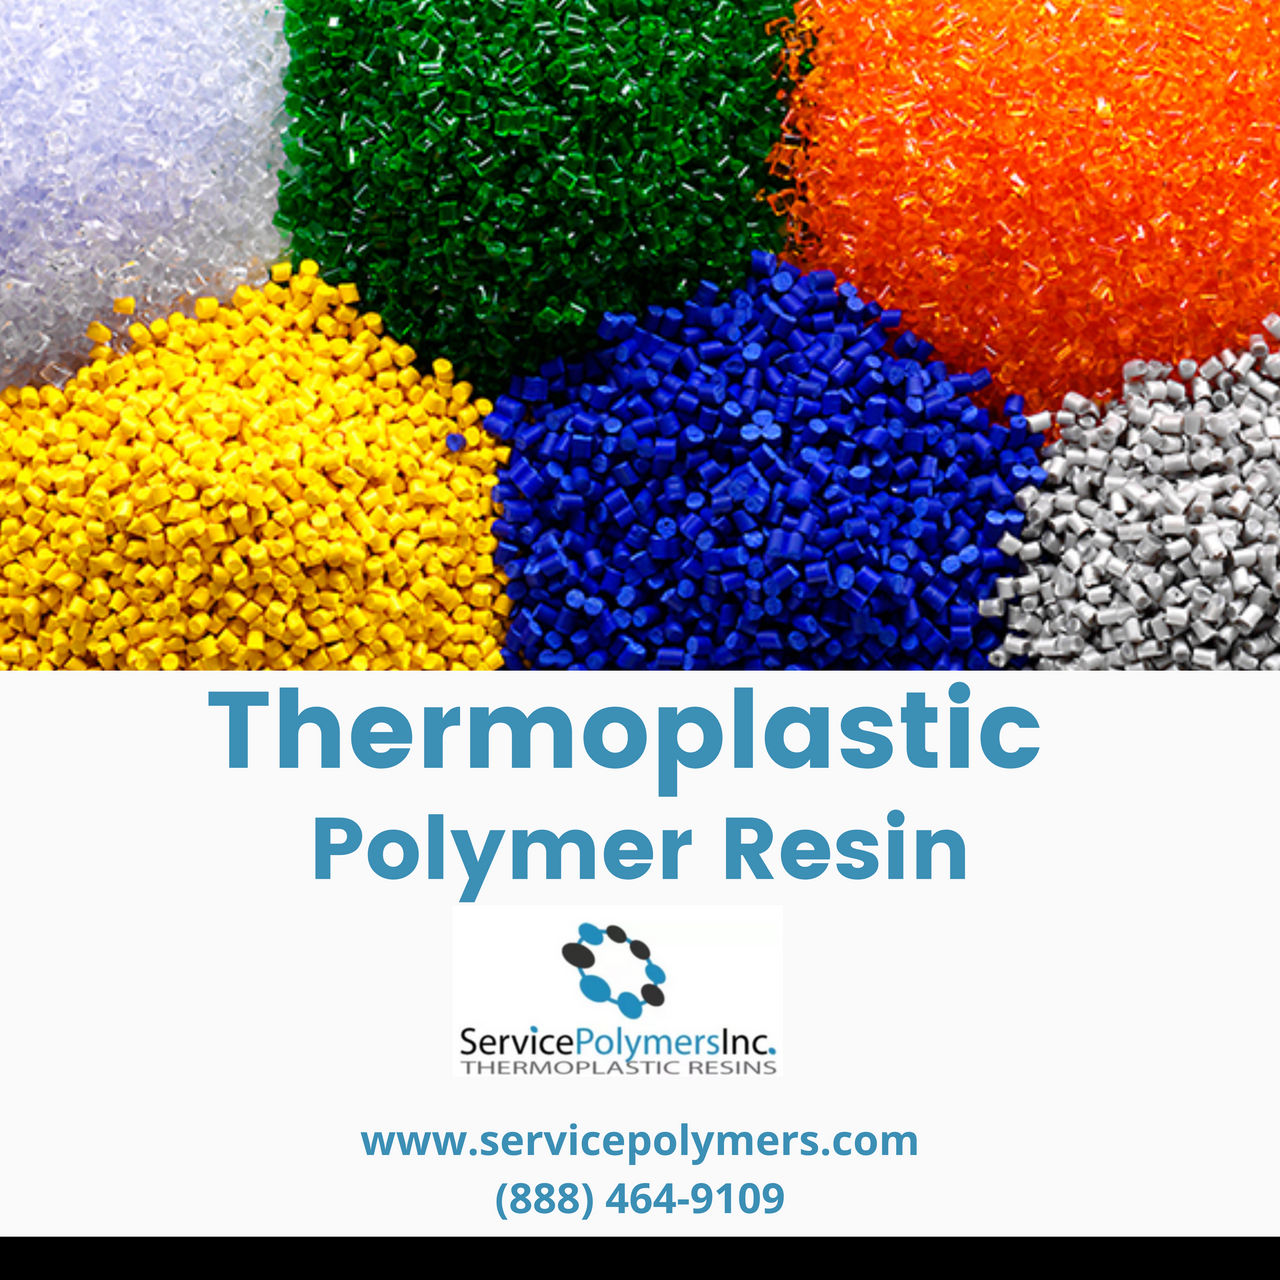 What Is a Thermoplastic Polymer?